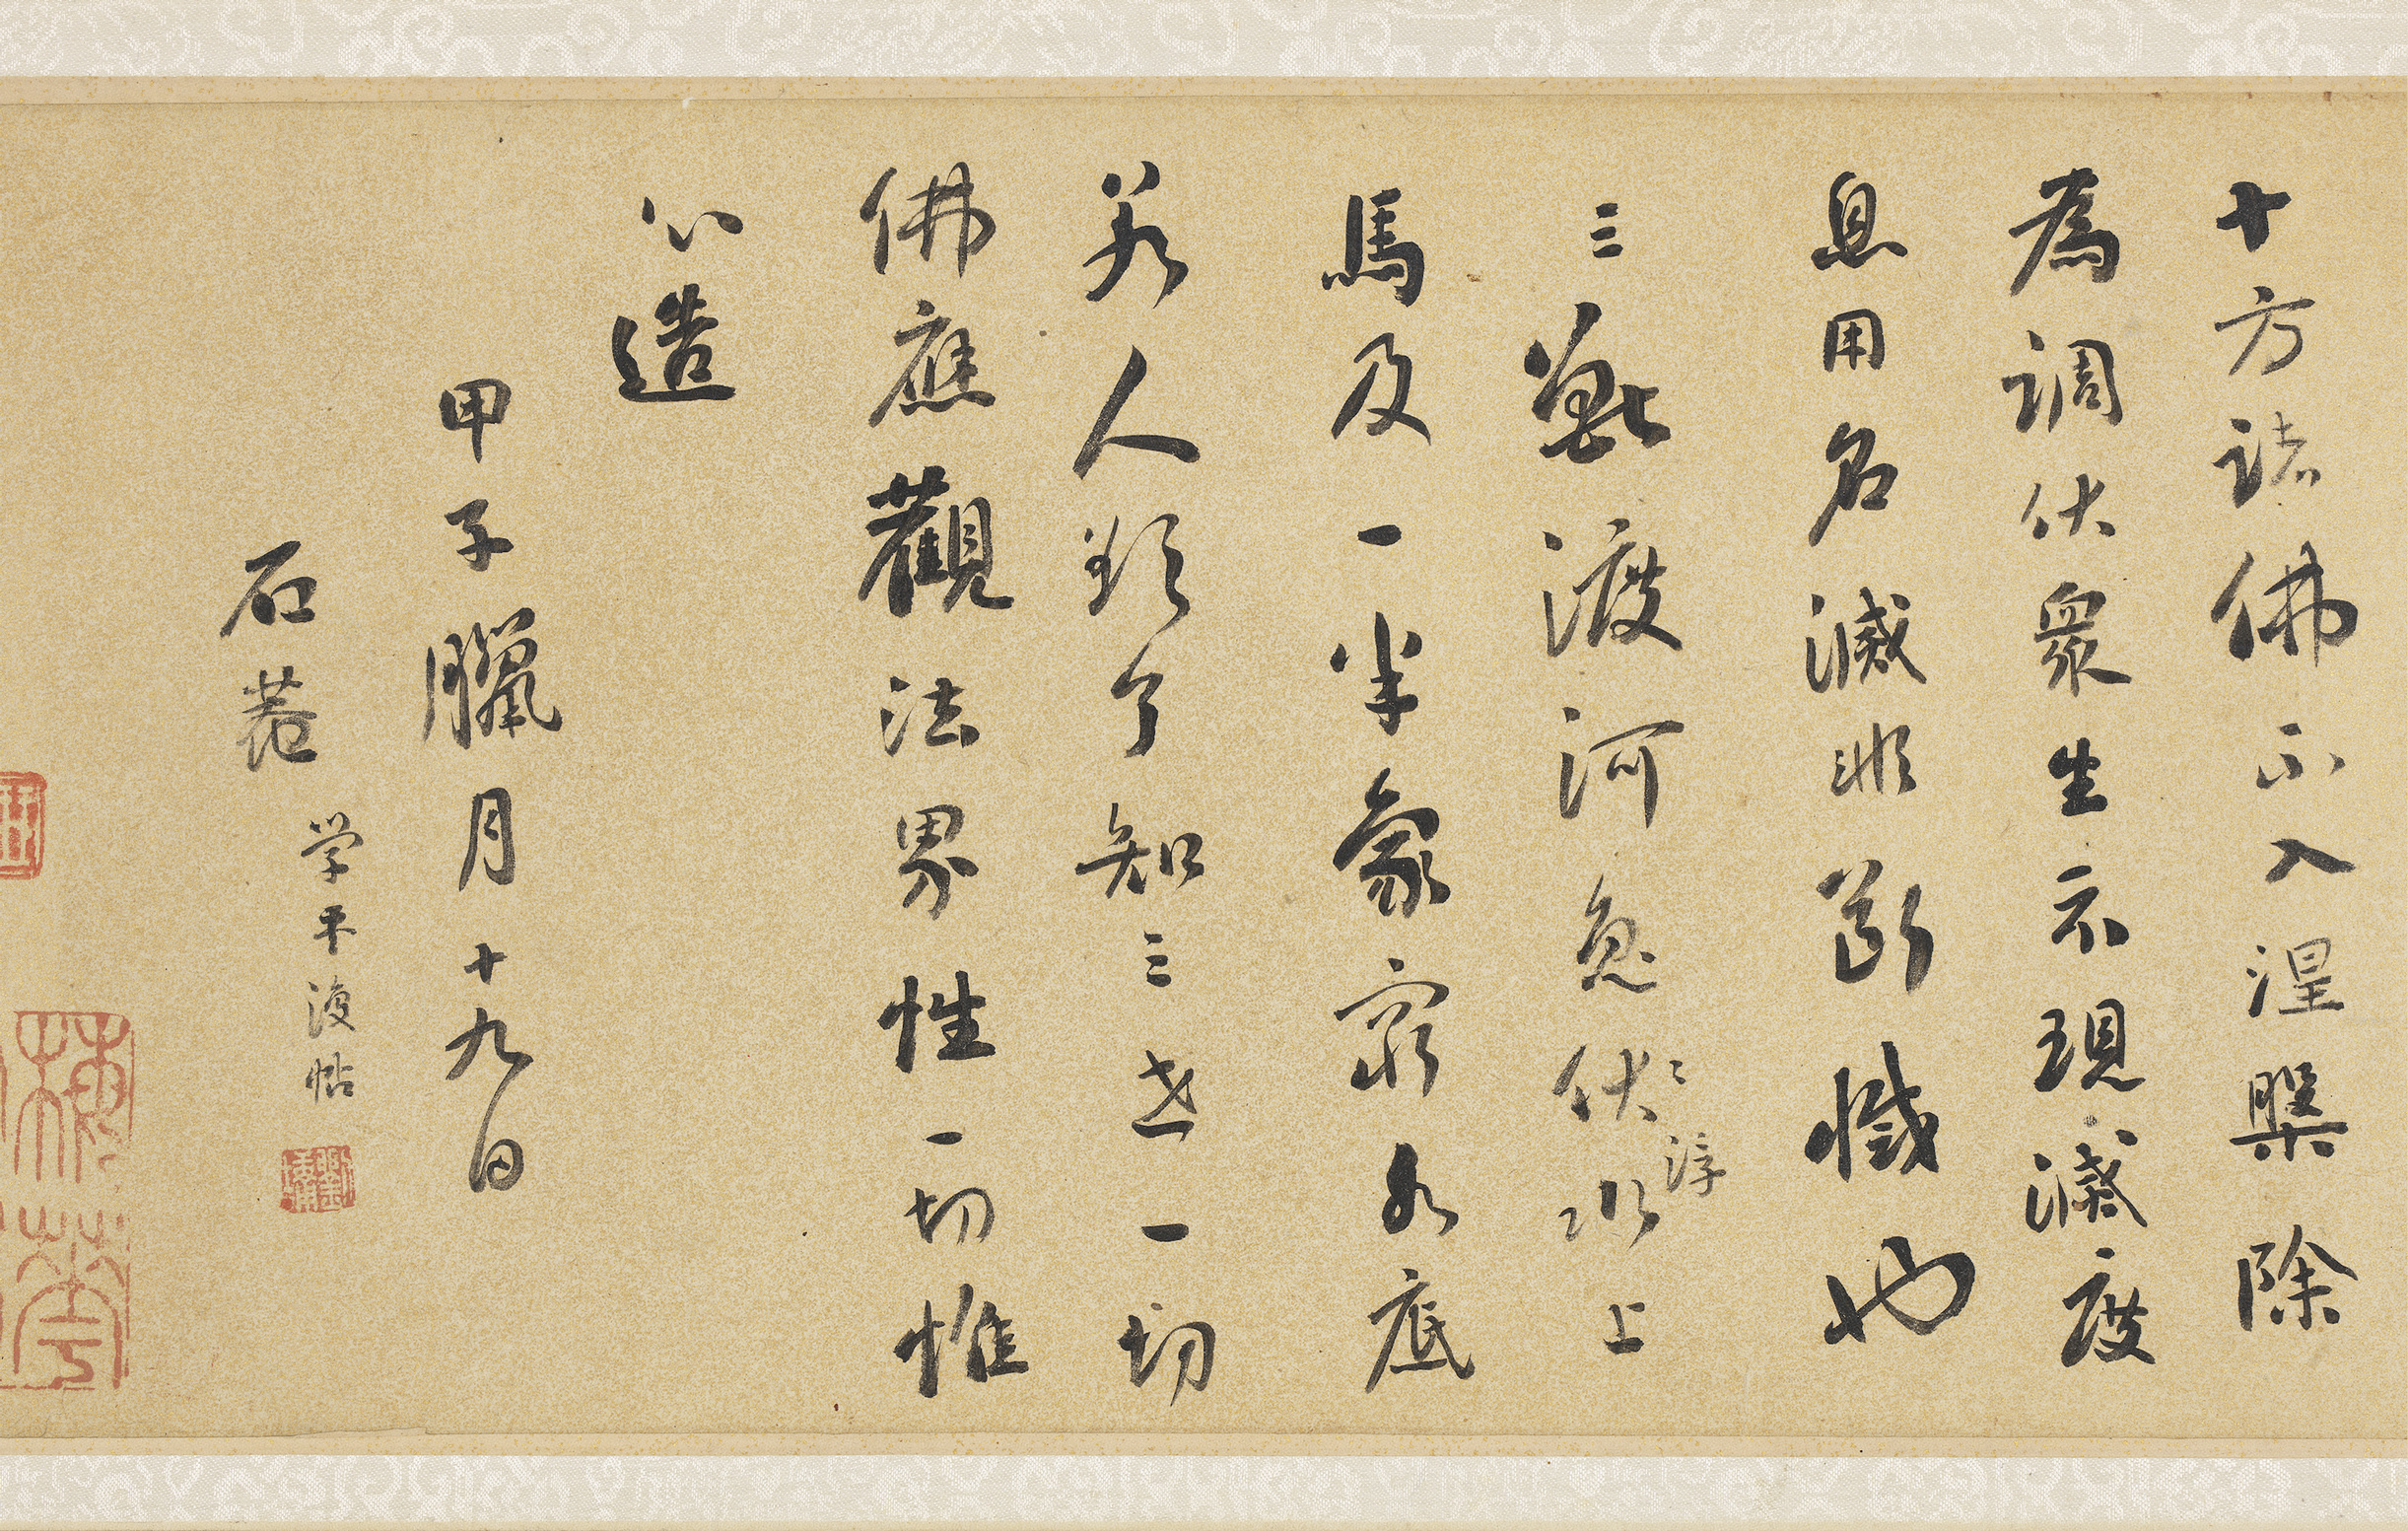 Exquisite Calligraphy from his Later Years